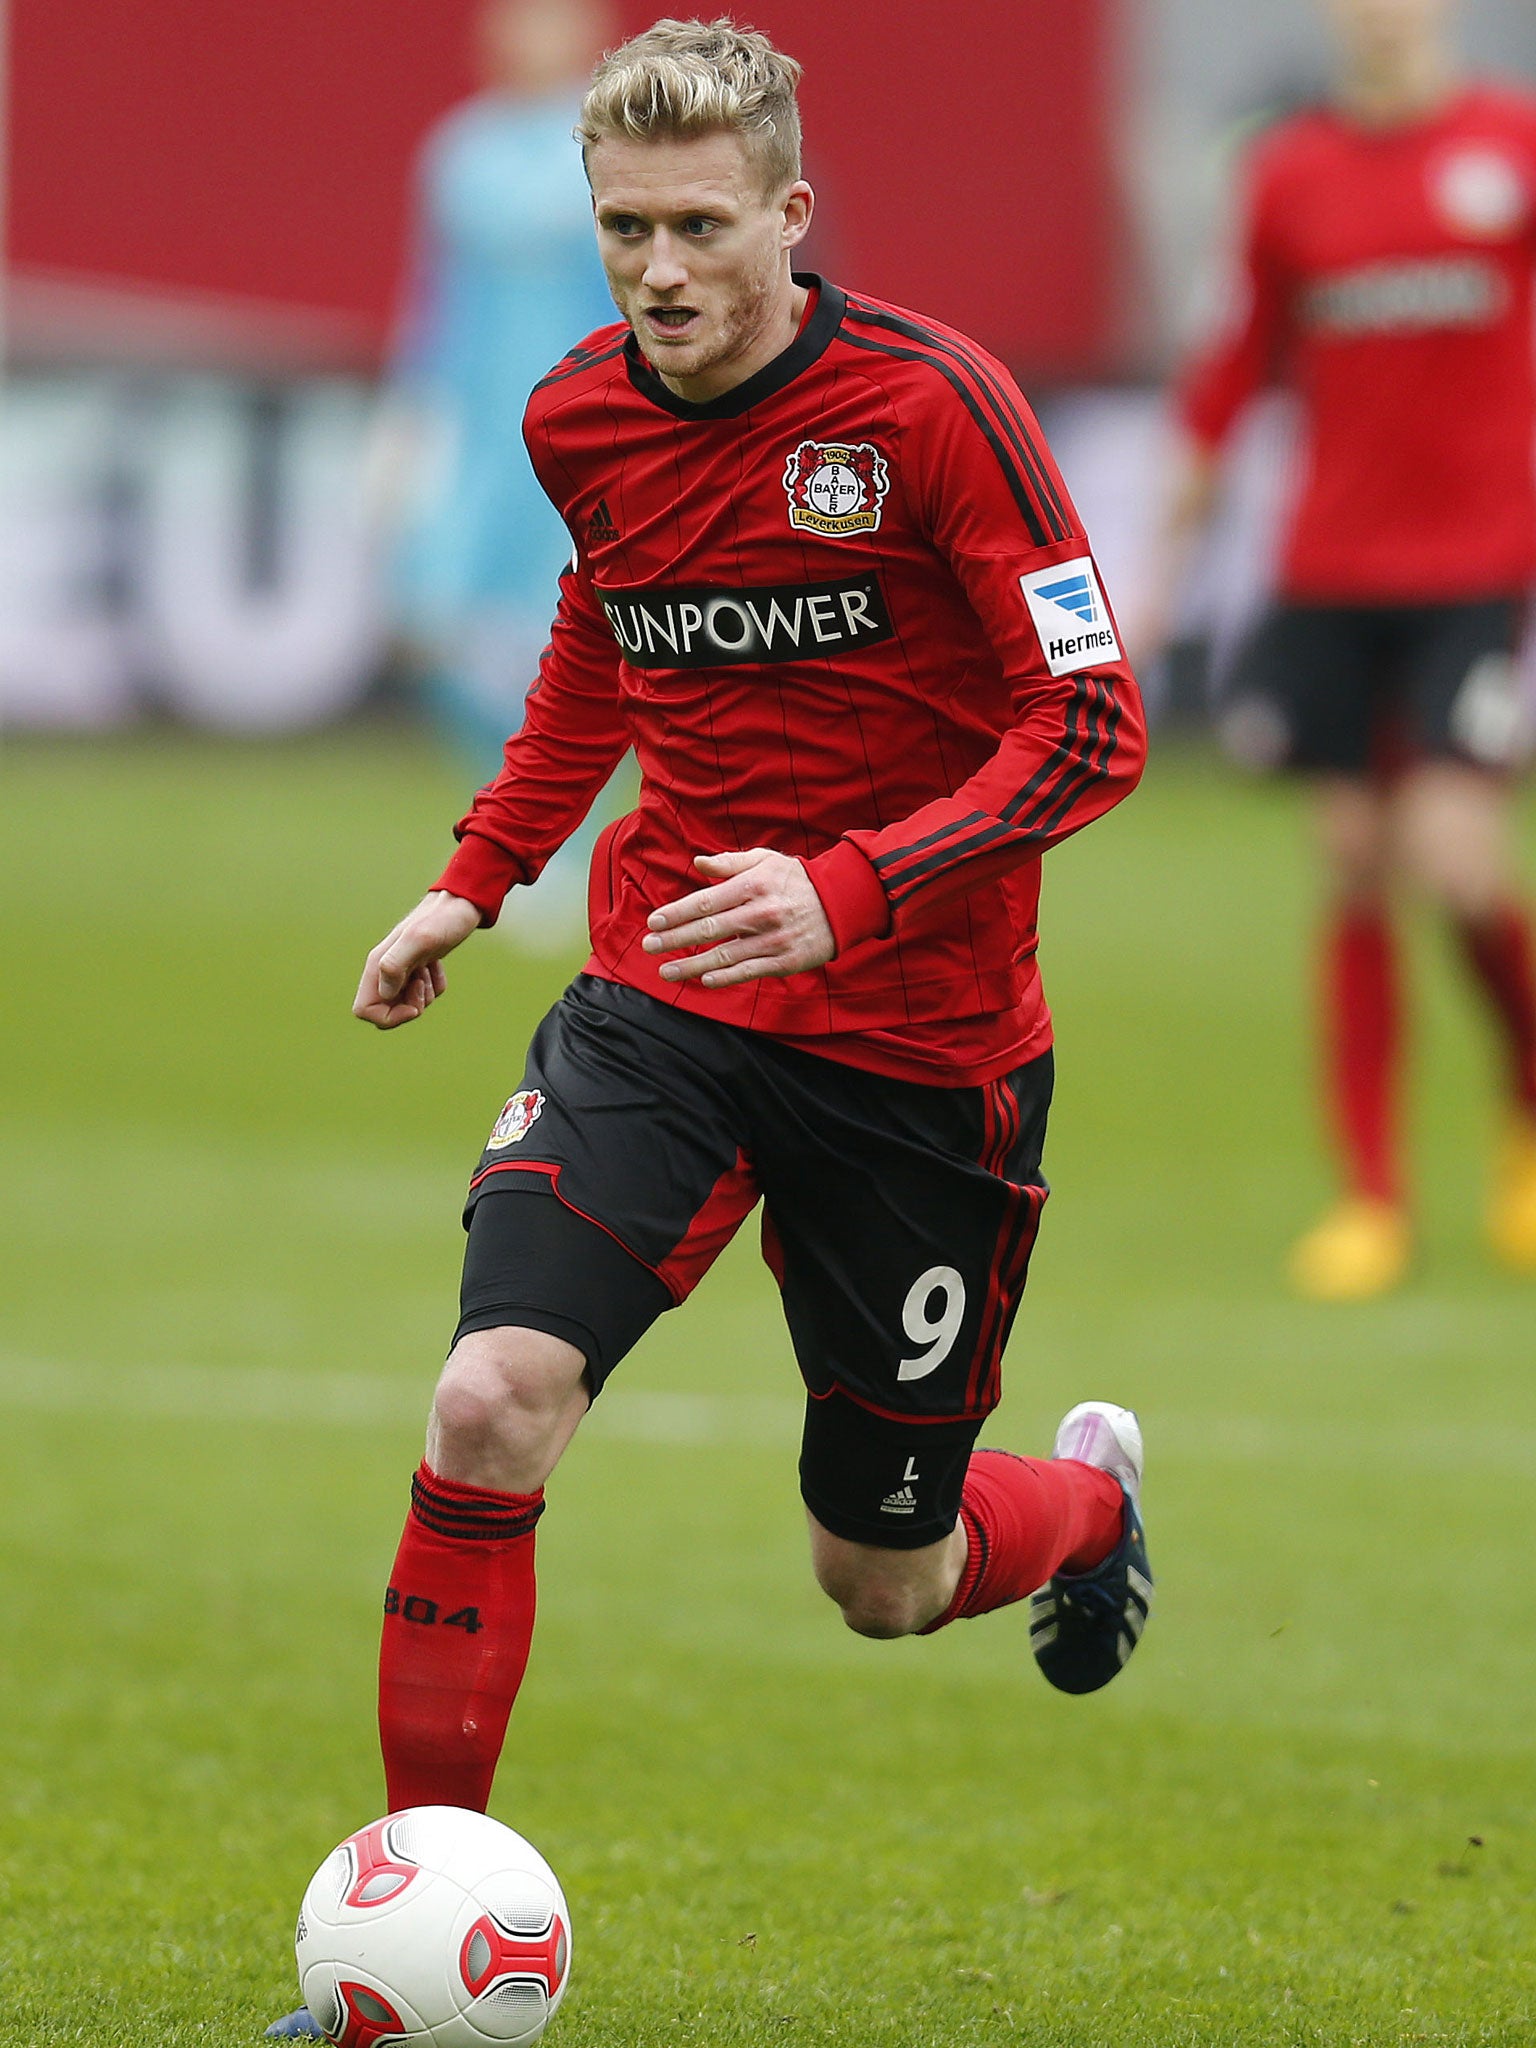 Chelsea have agreed a fee of £19m for Leverkusen’s André Schürrle